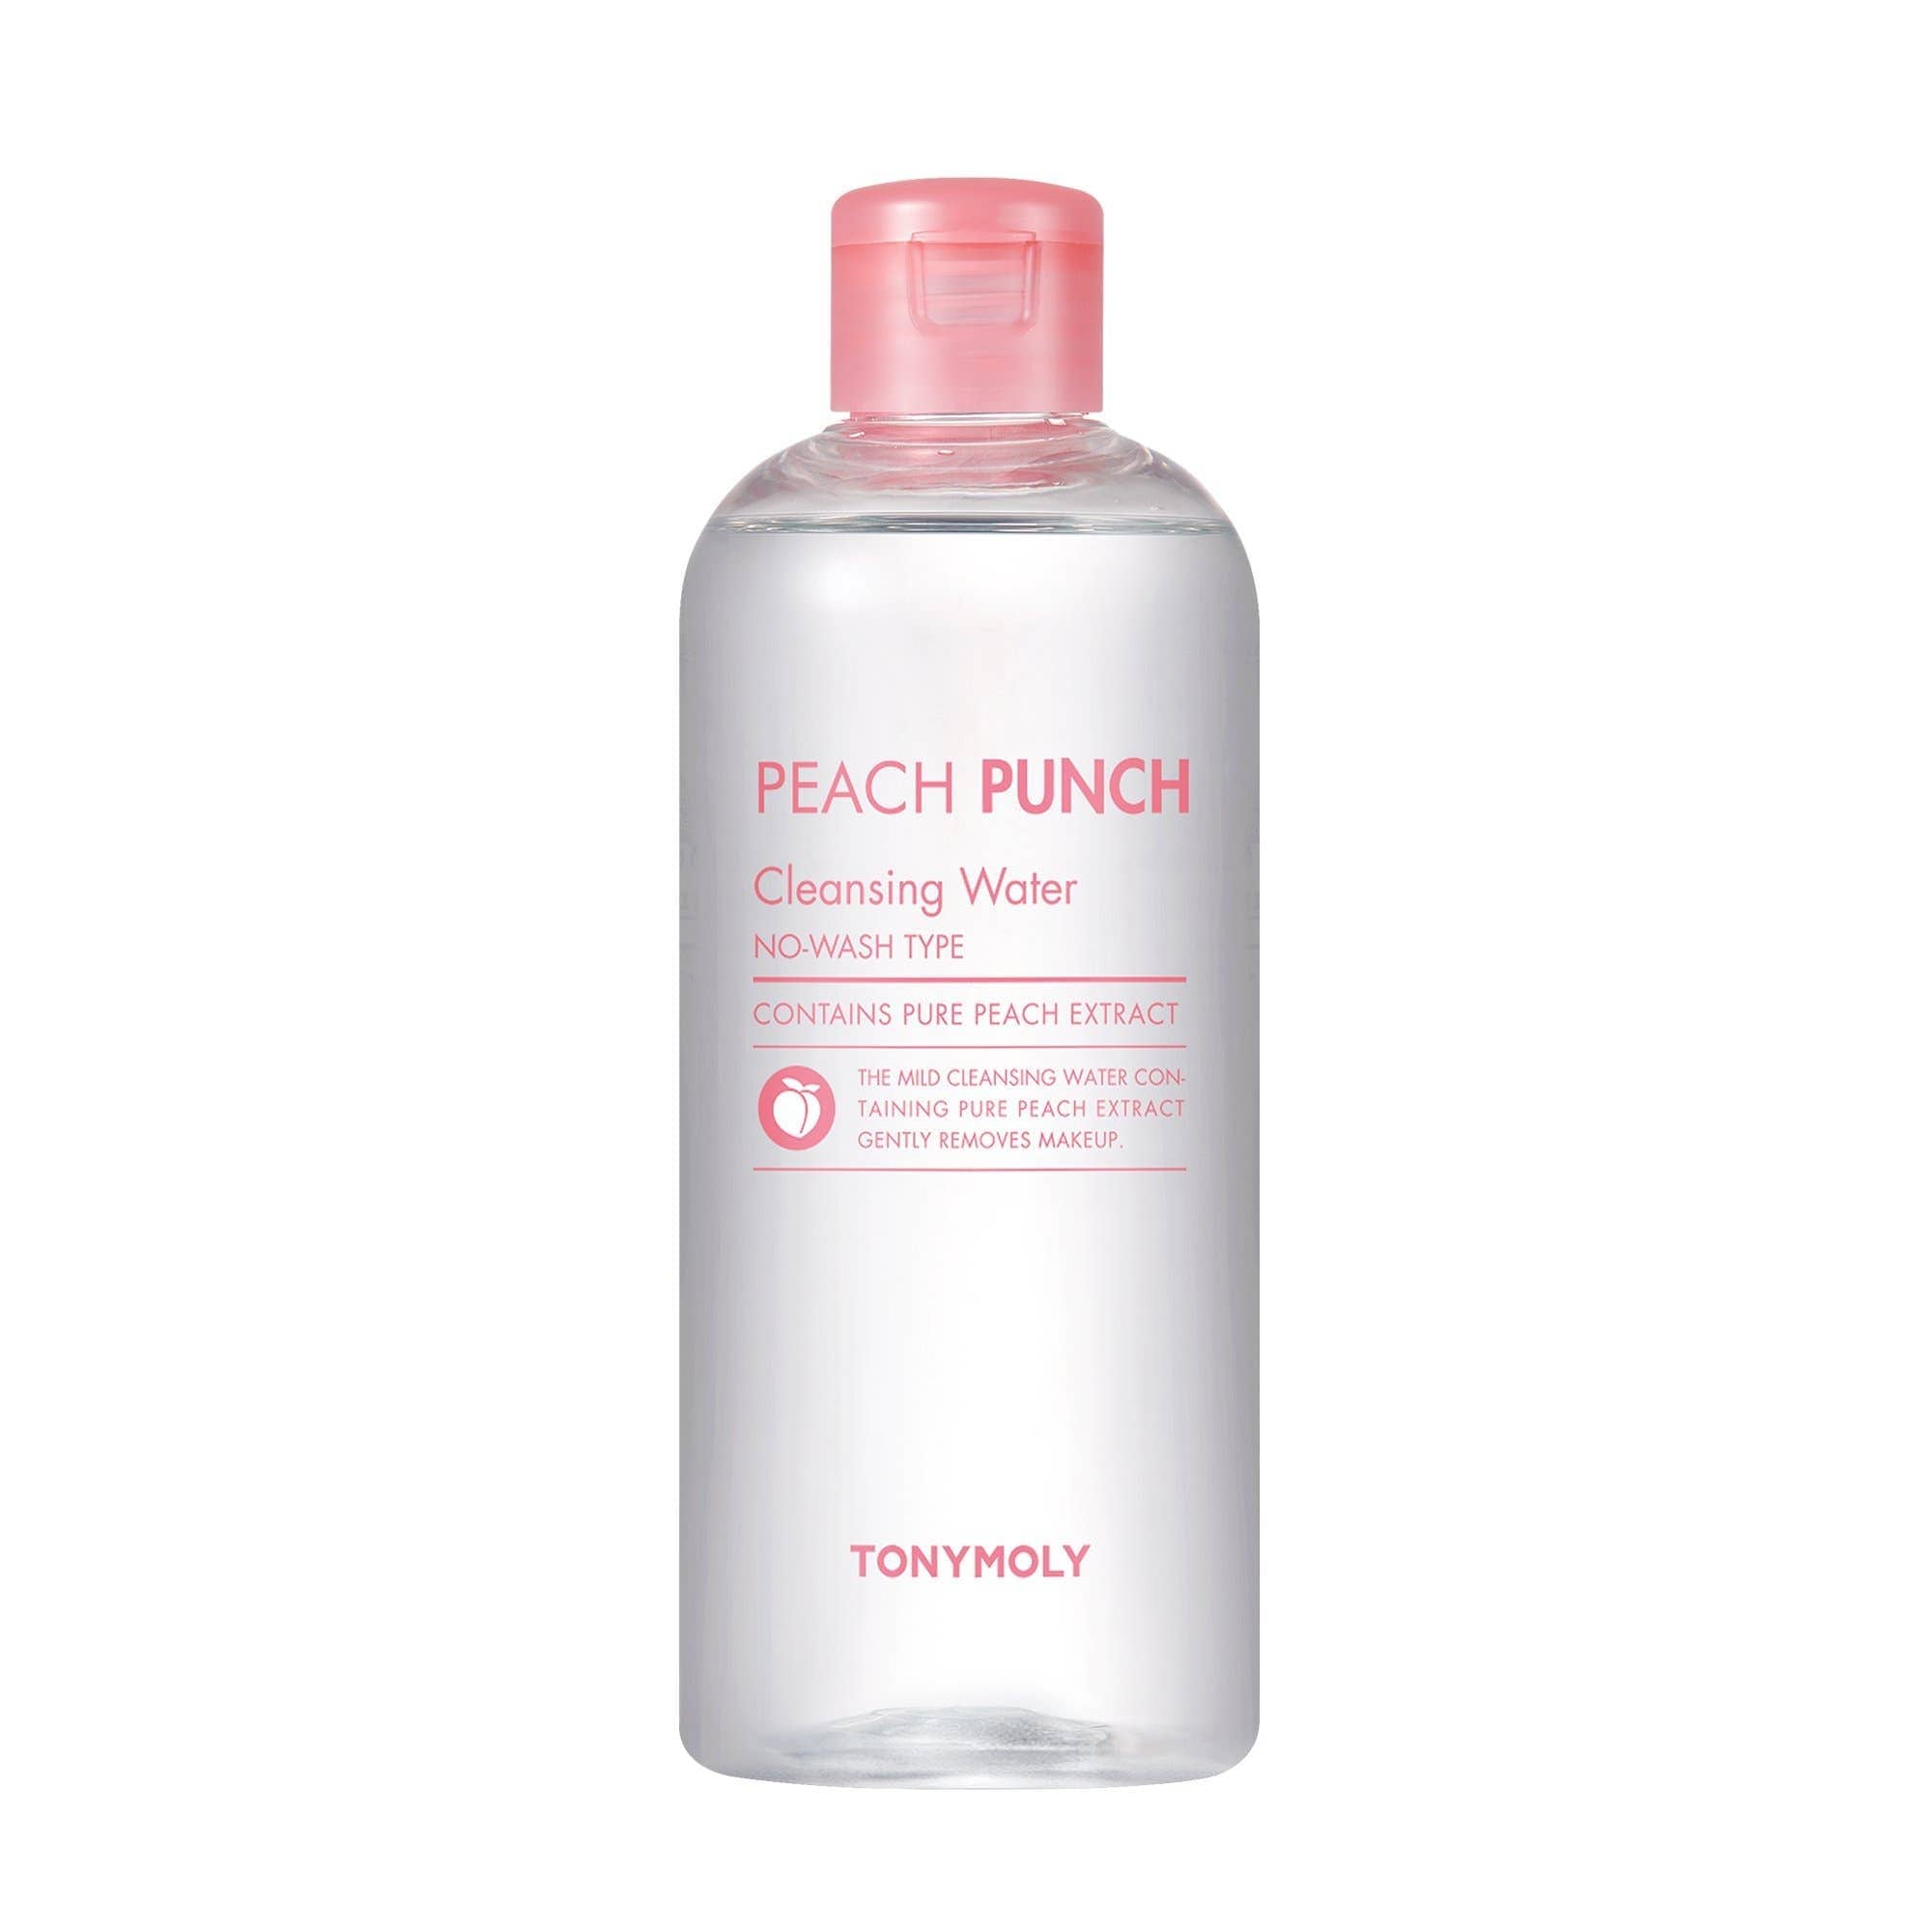 TONYMOLY Peach Punch Cleansing Water Kawaii Gifts 8806358530167